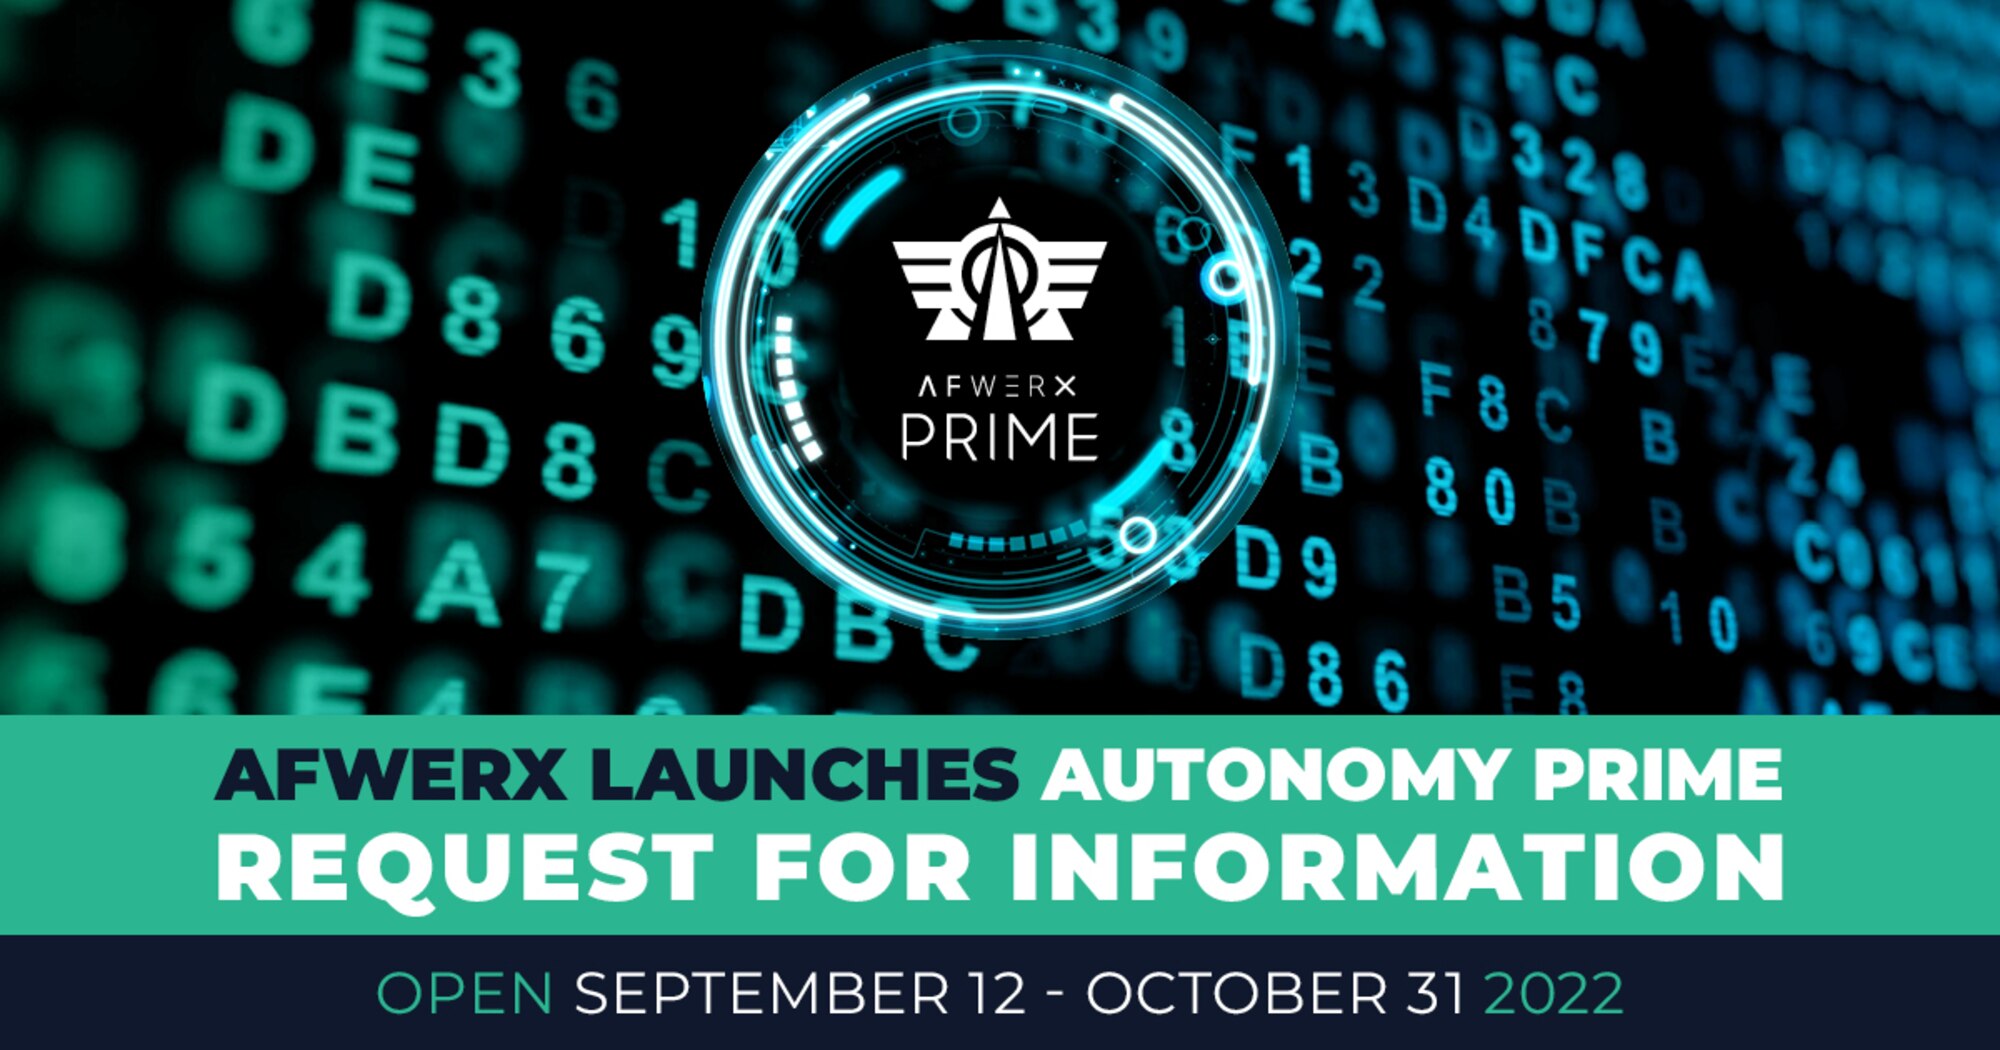 AFWERX launches the Autonomy Prime Request for Information, which is open from Sept. 12 to Oct. 31, 2022. (Courtesy graphic)